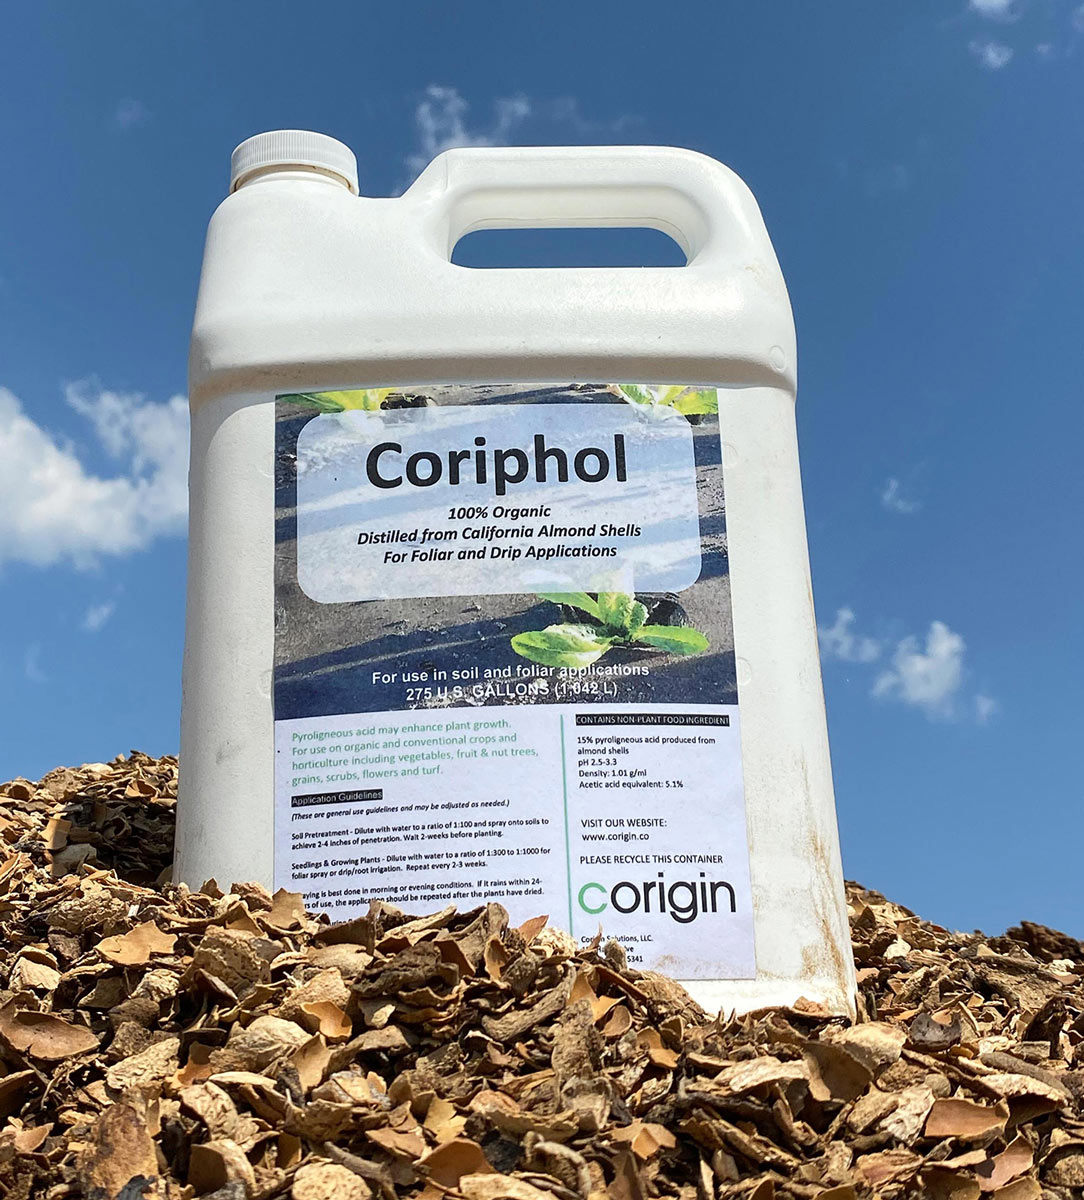 Coriphol in a jug with product label